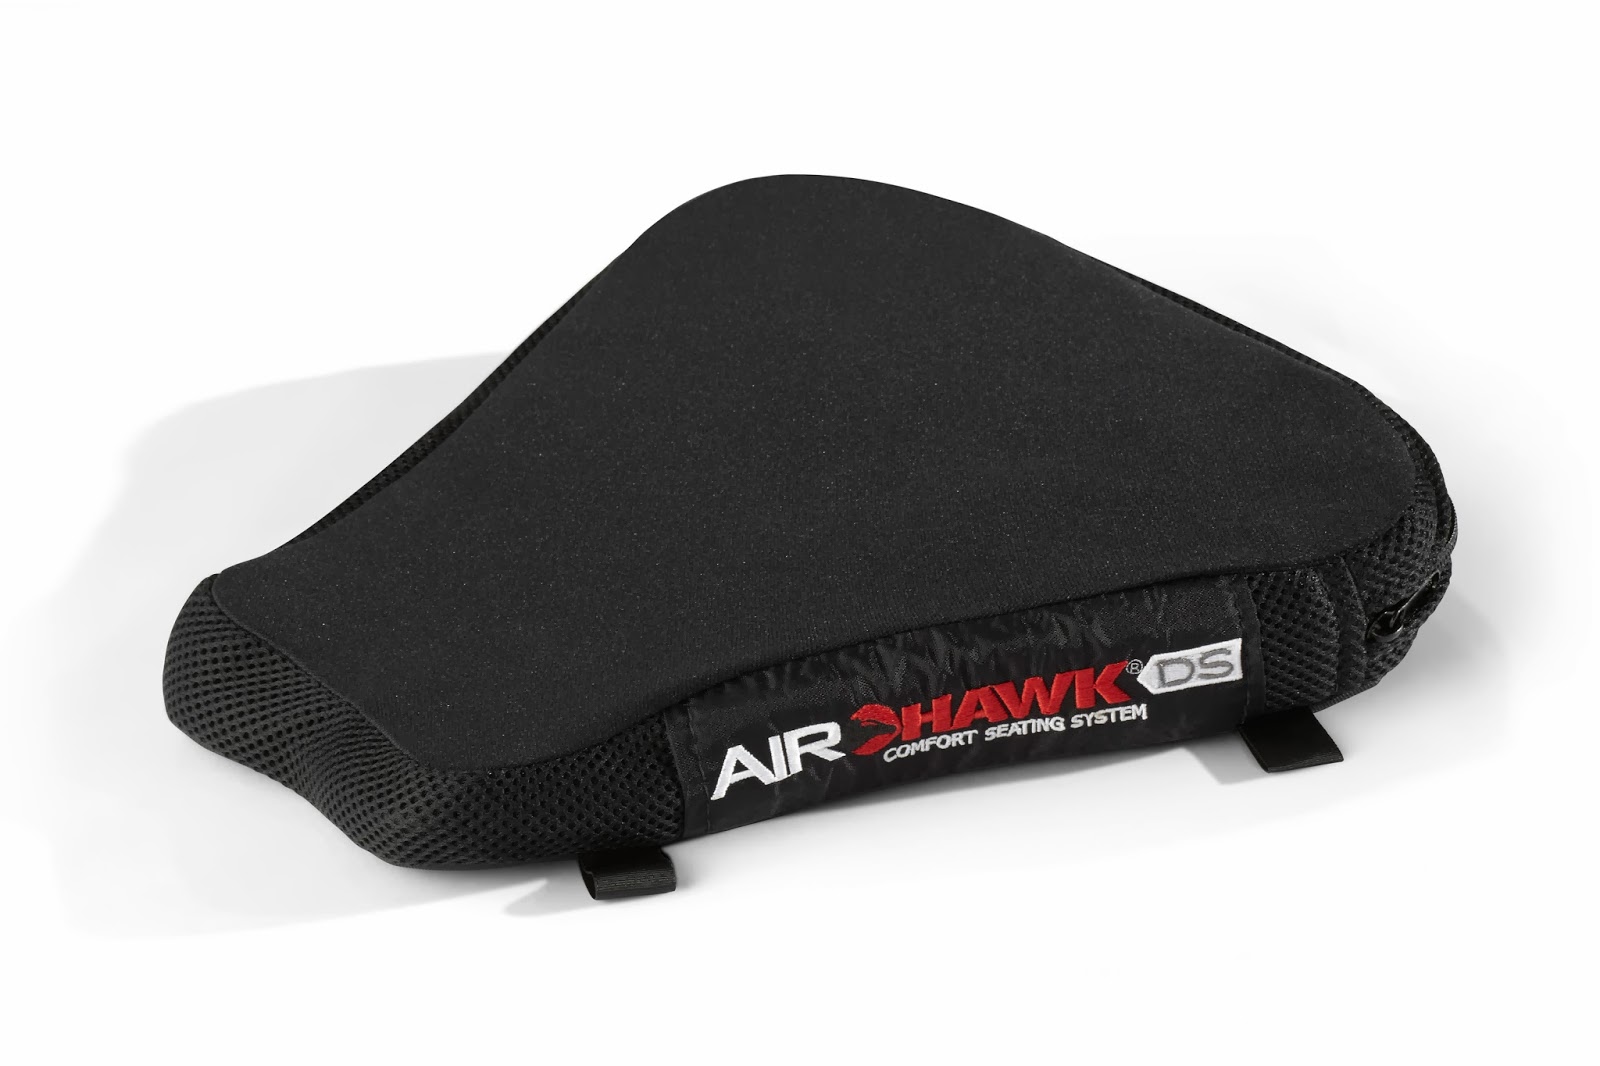 New: AIRHAWK DS inflatable seat cushion